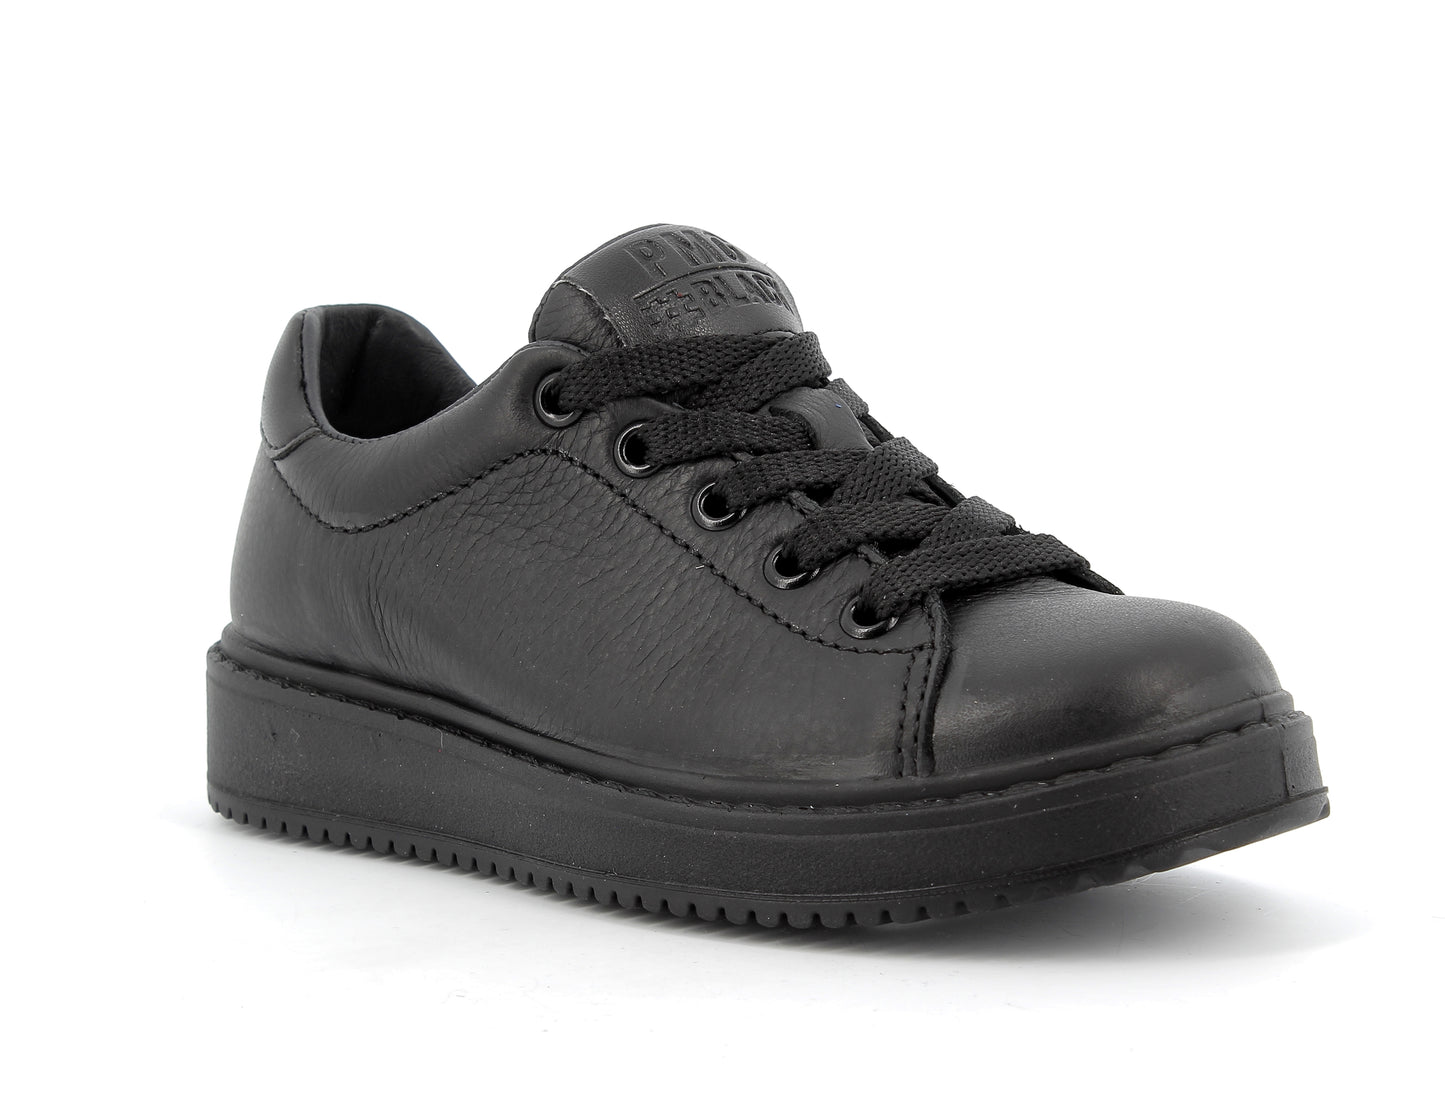 Black leather Lace up "Luca" School Shoes